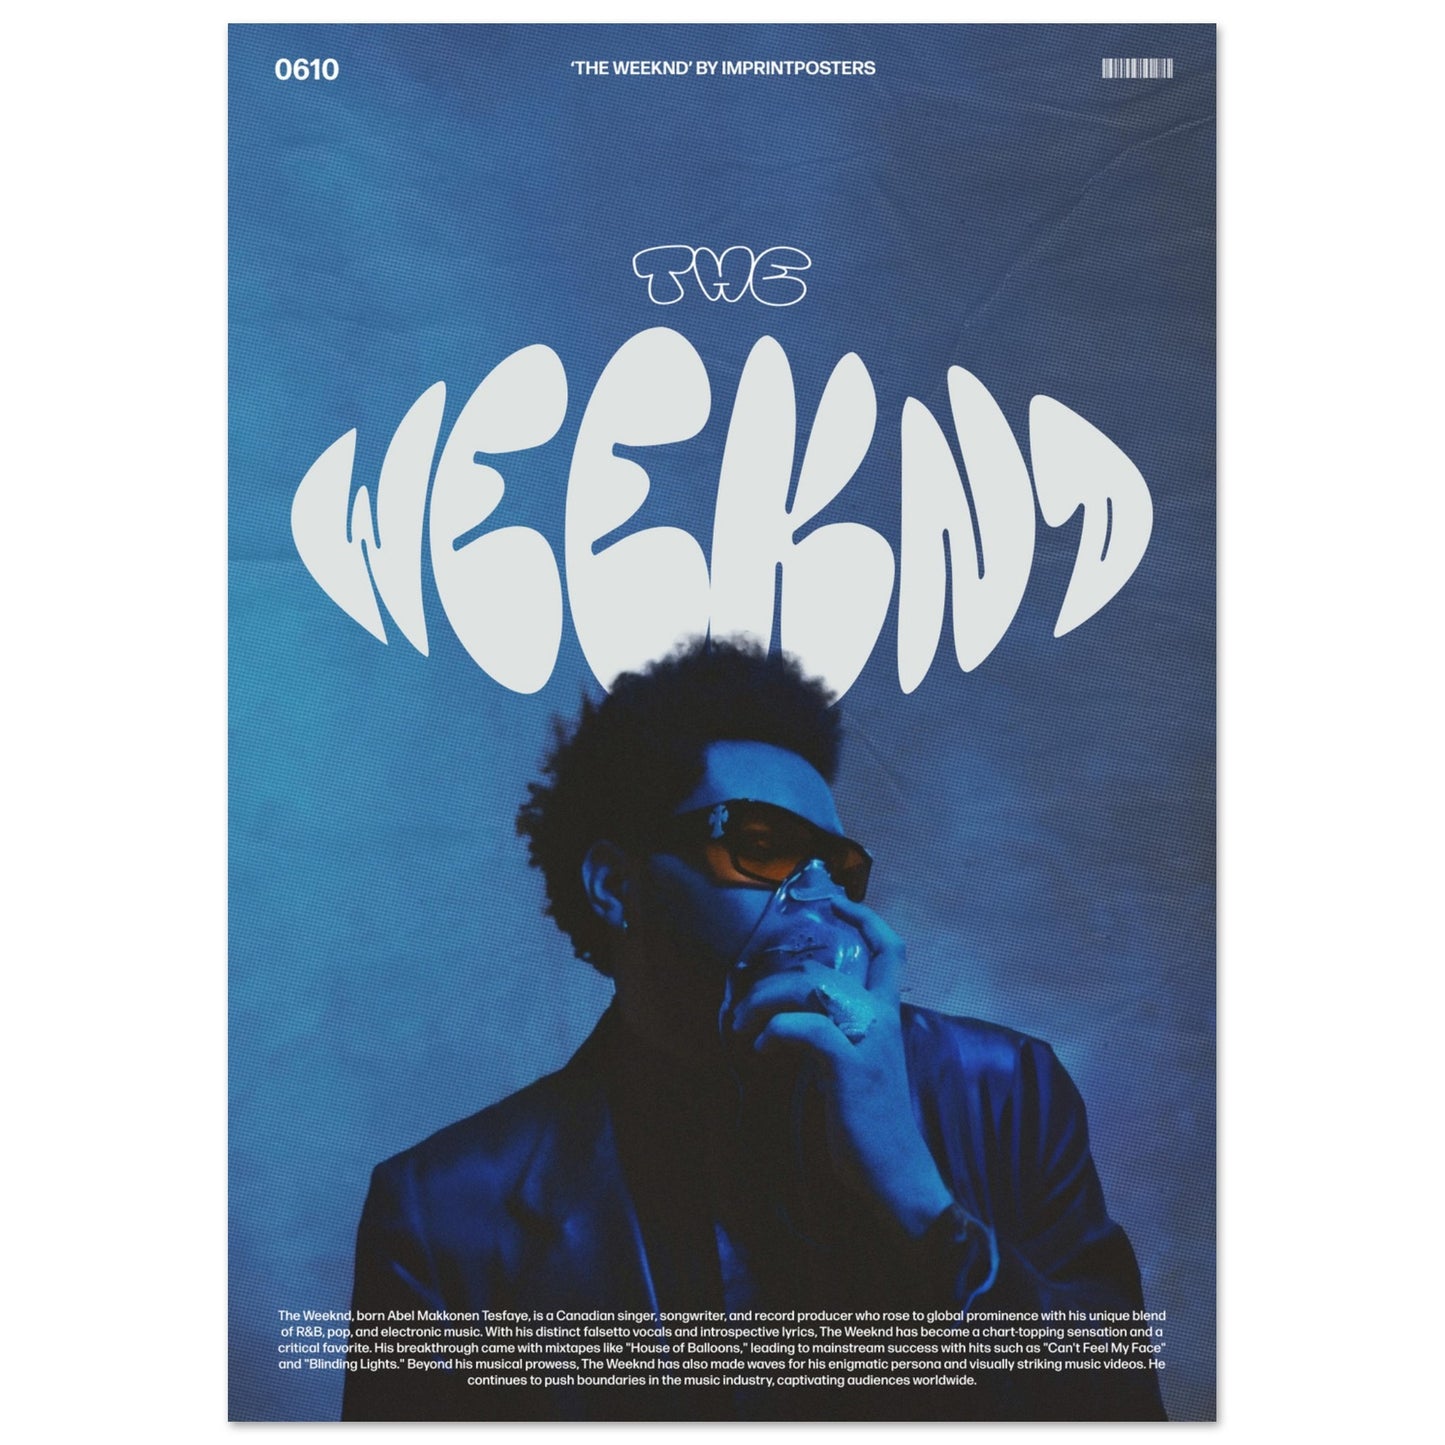 The Weeknd Poster